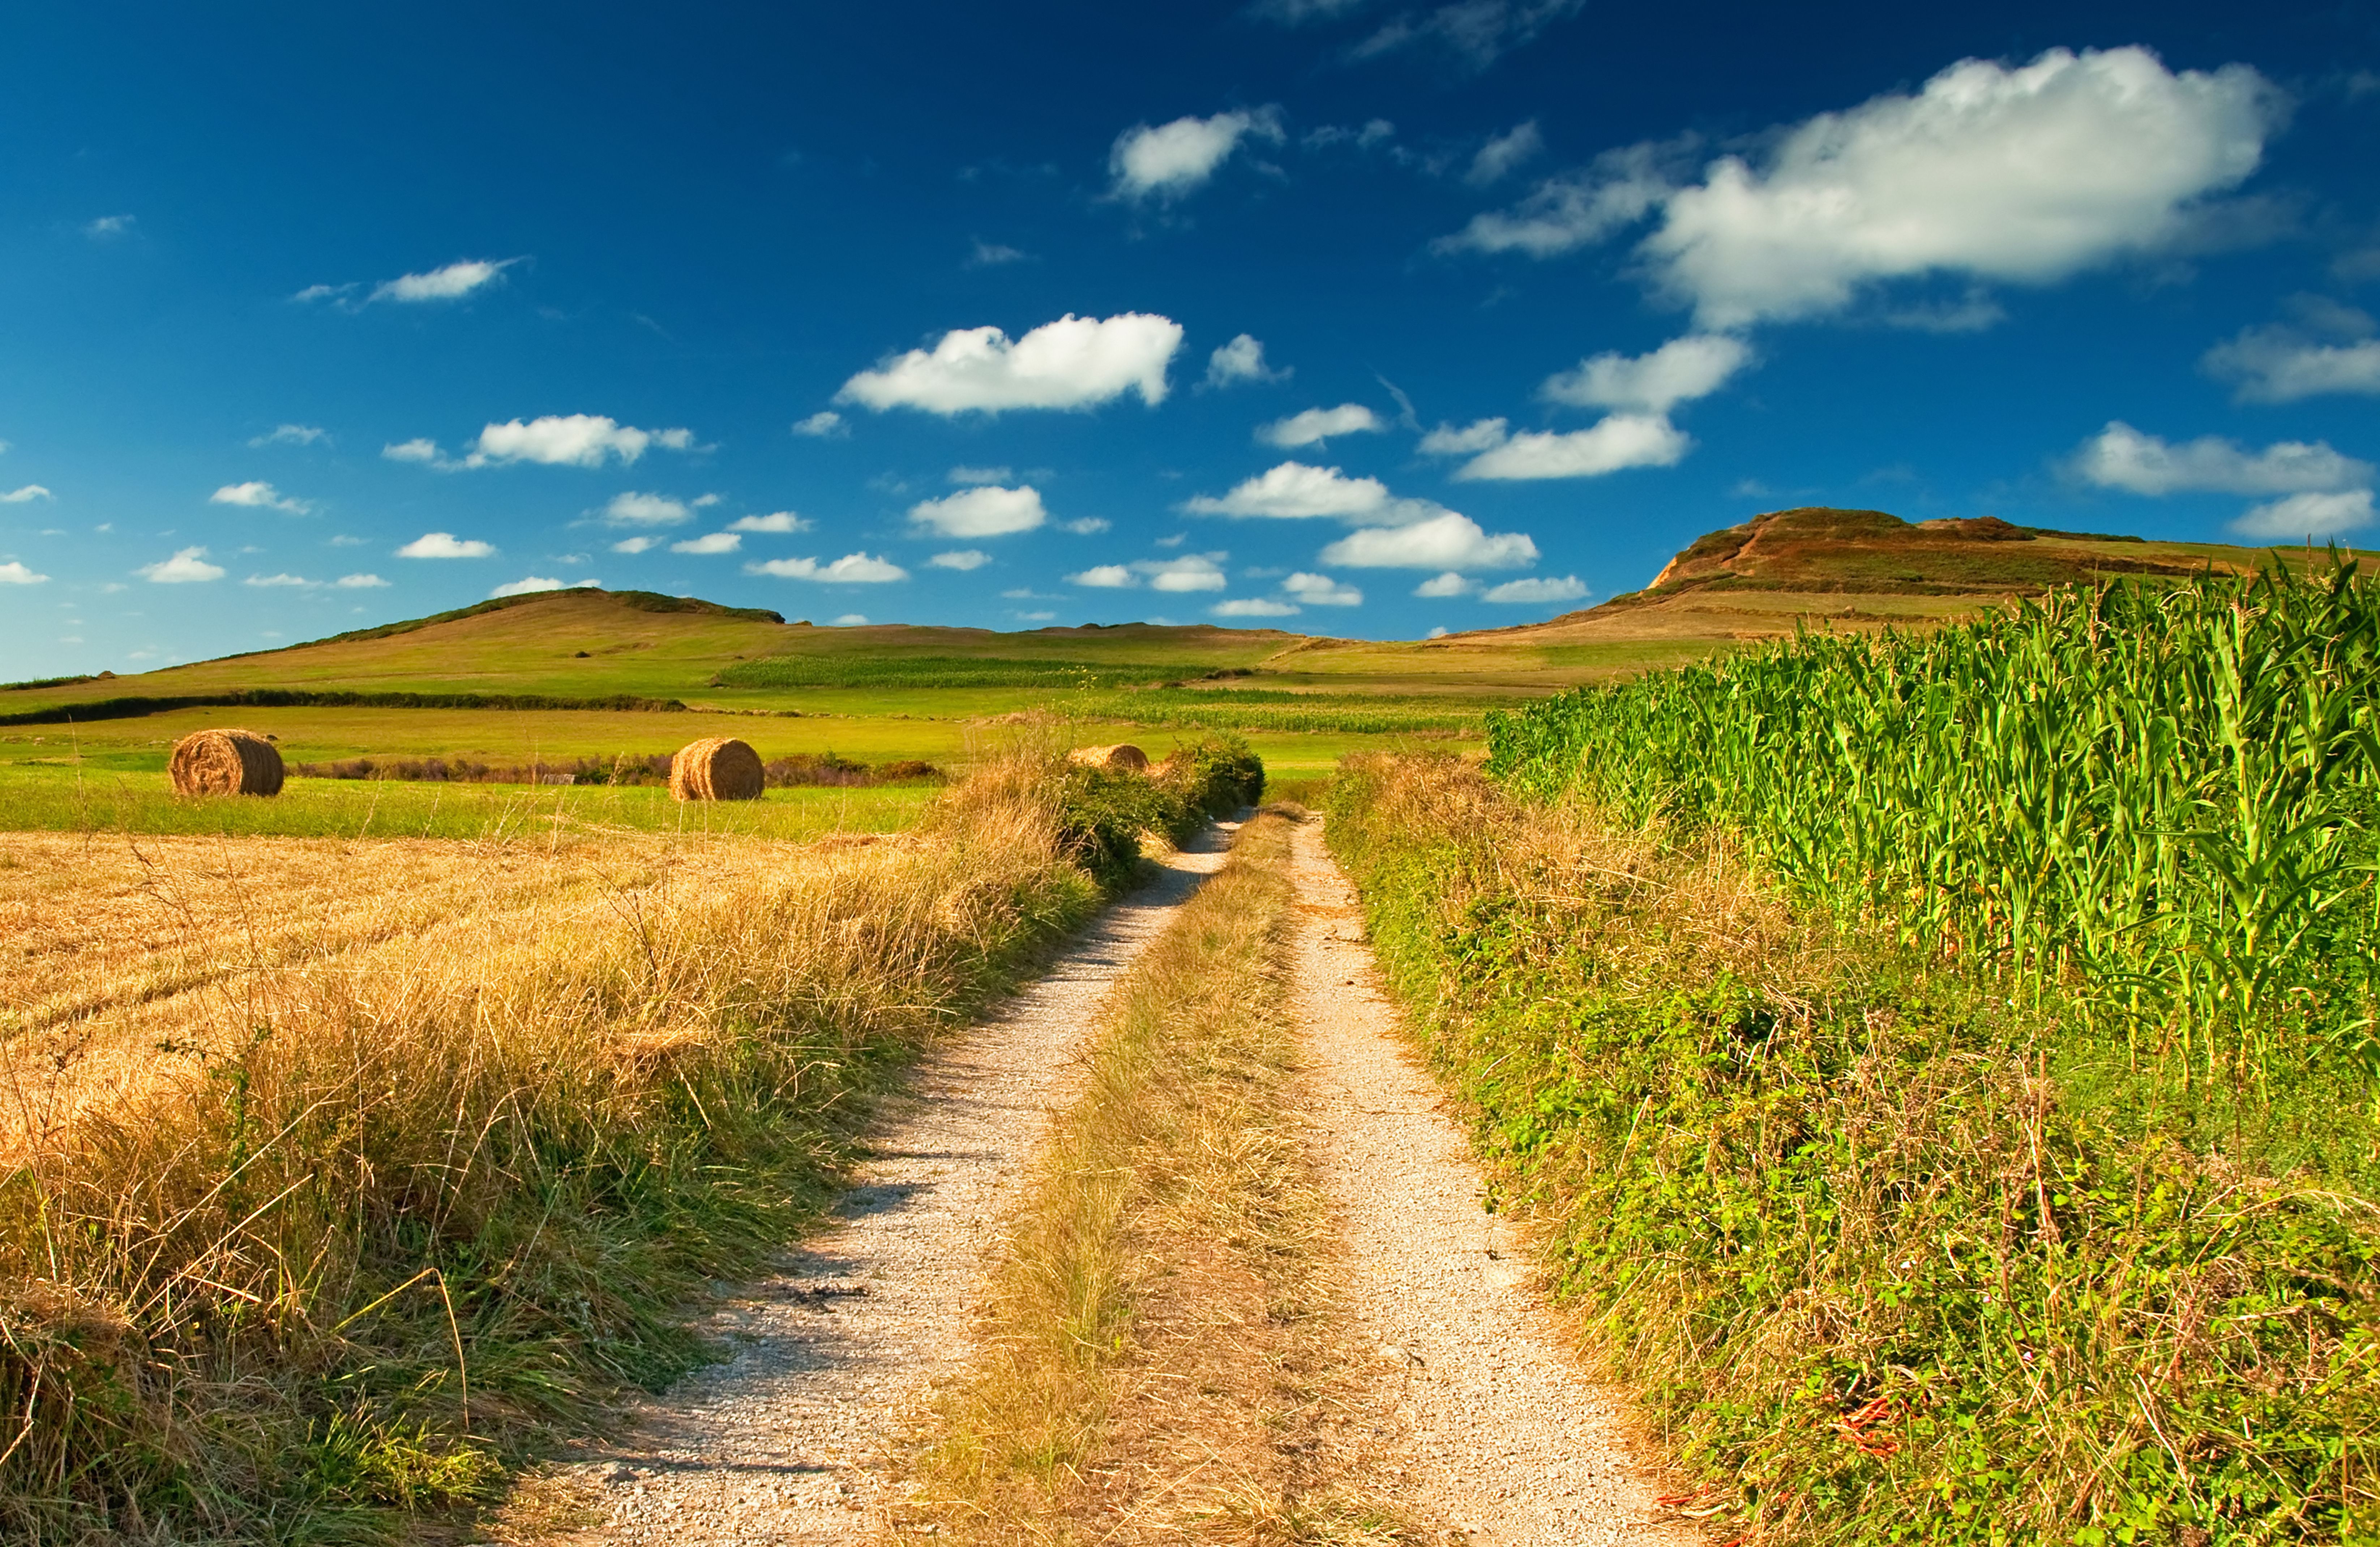 Landscape Nature Scenery Blue Sky Picture Scenic Country Road